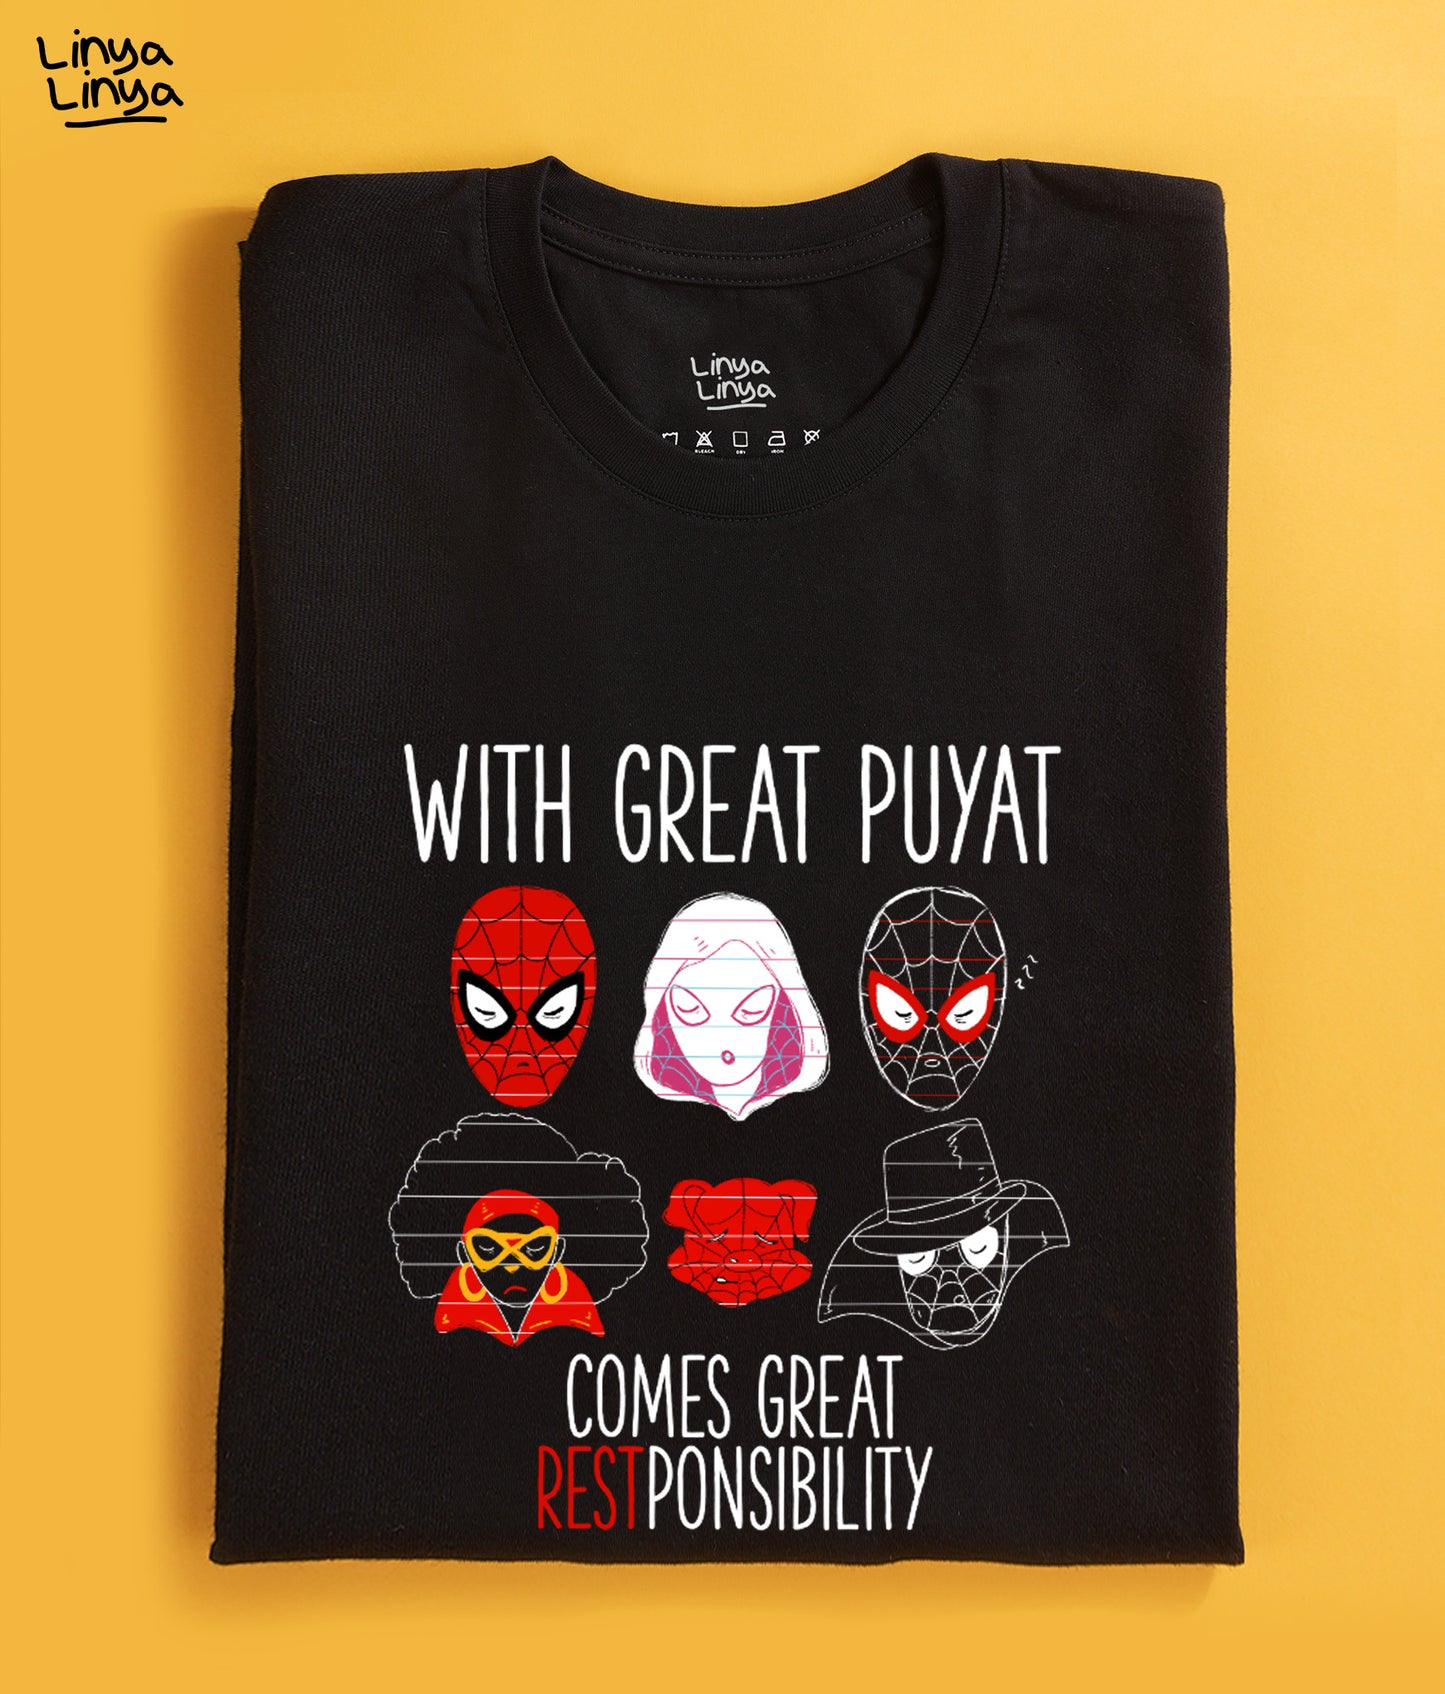 With Great Puyat,  Comes Great Rest-Ponsibility (Black)